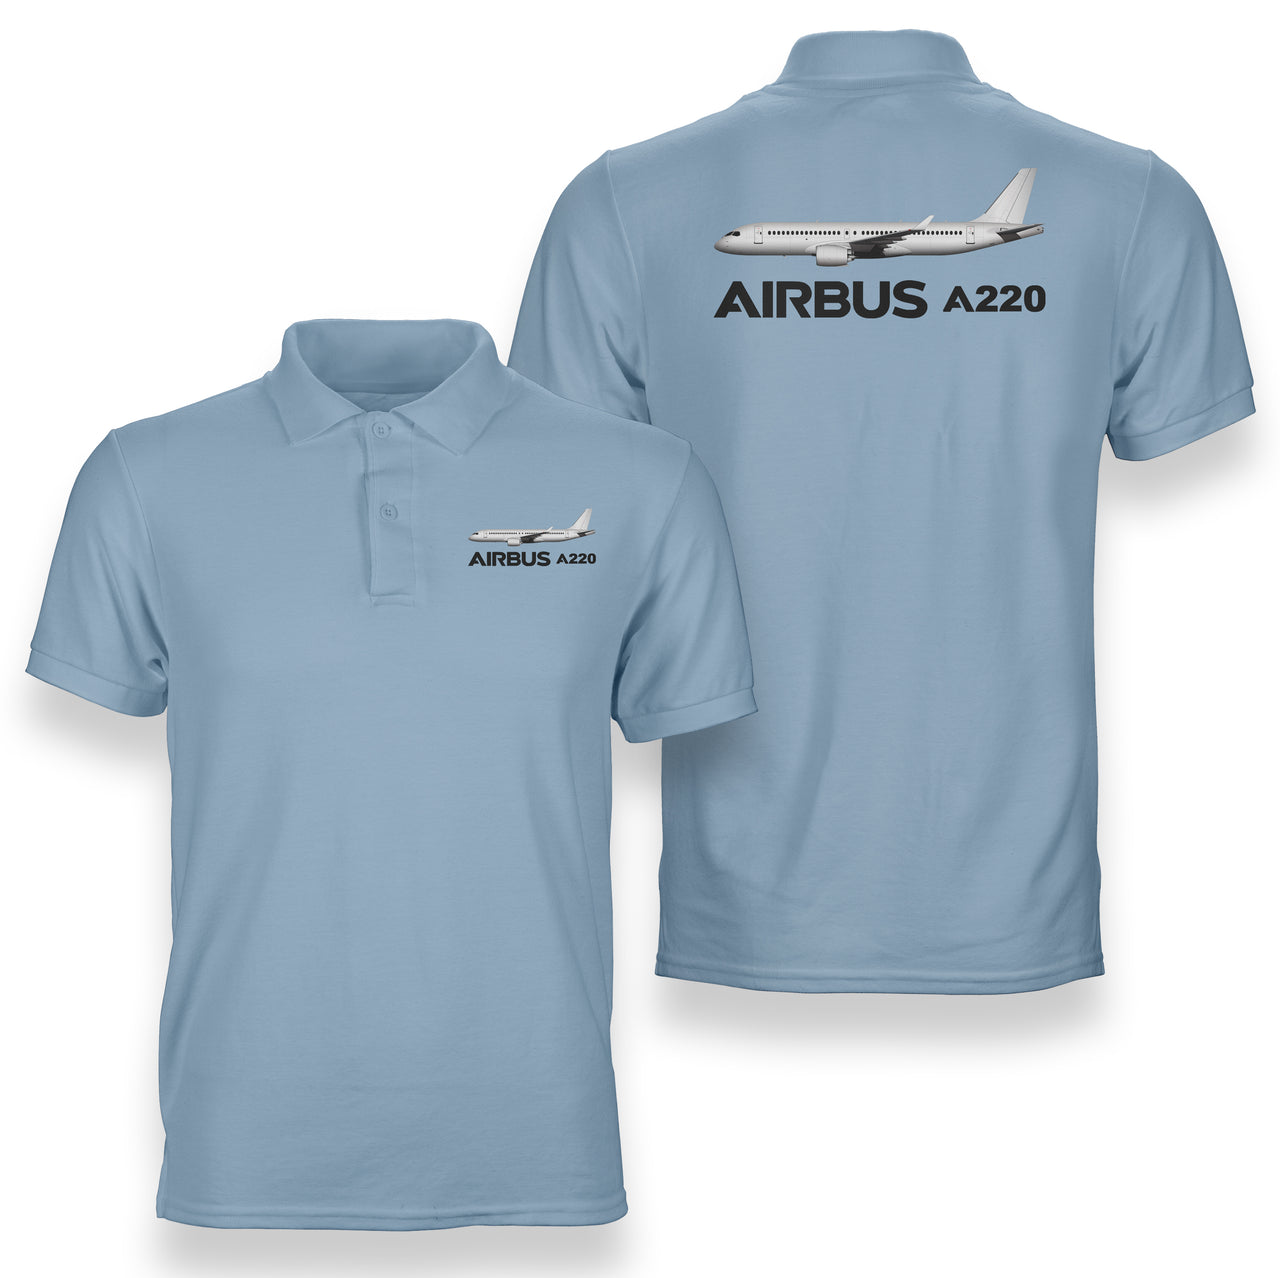 The Airbus A220 Designed Double Side Polo T-Shirts